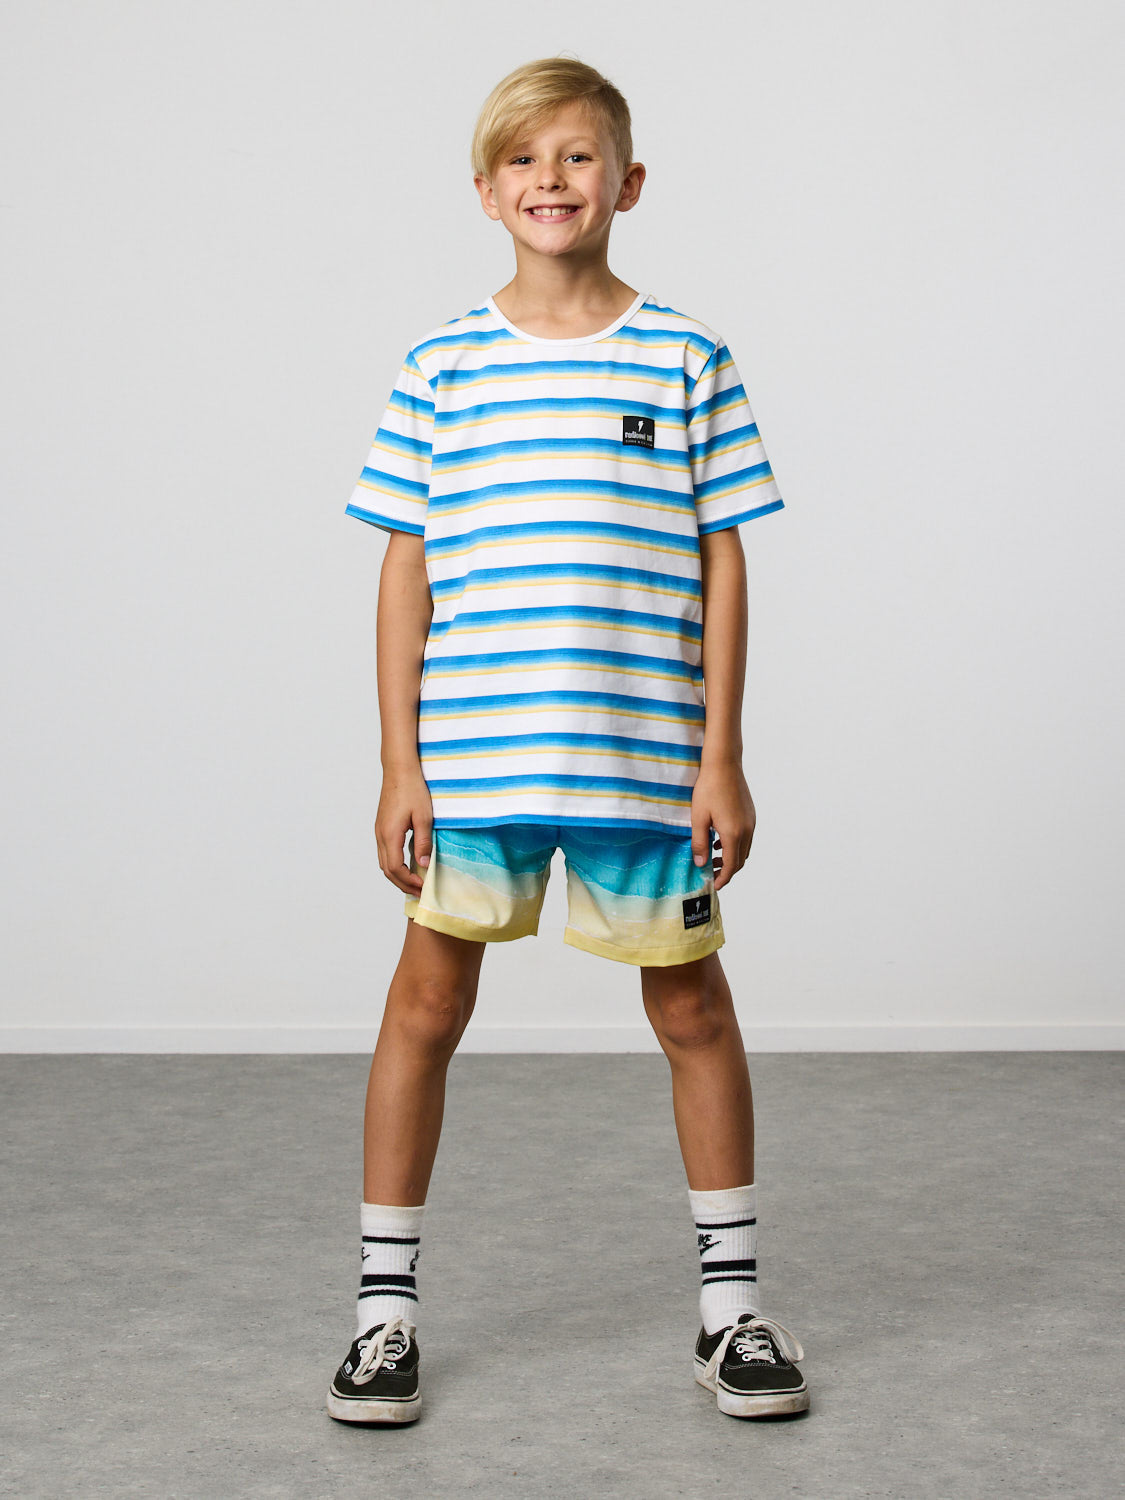 Radicool Kids beach stripe tee: Cotton / spandex tee in white with beach waves printed in horizontal stripes. Radicool Dude badge on chest. We love a stripe, even more when it’s the colours of the beach!  Fit is true to size.